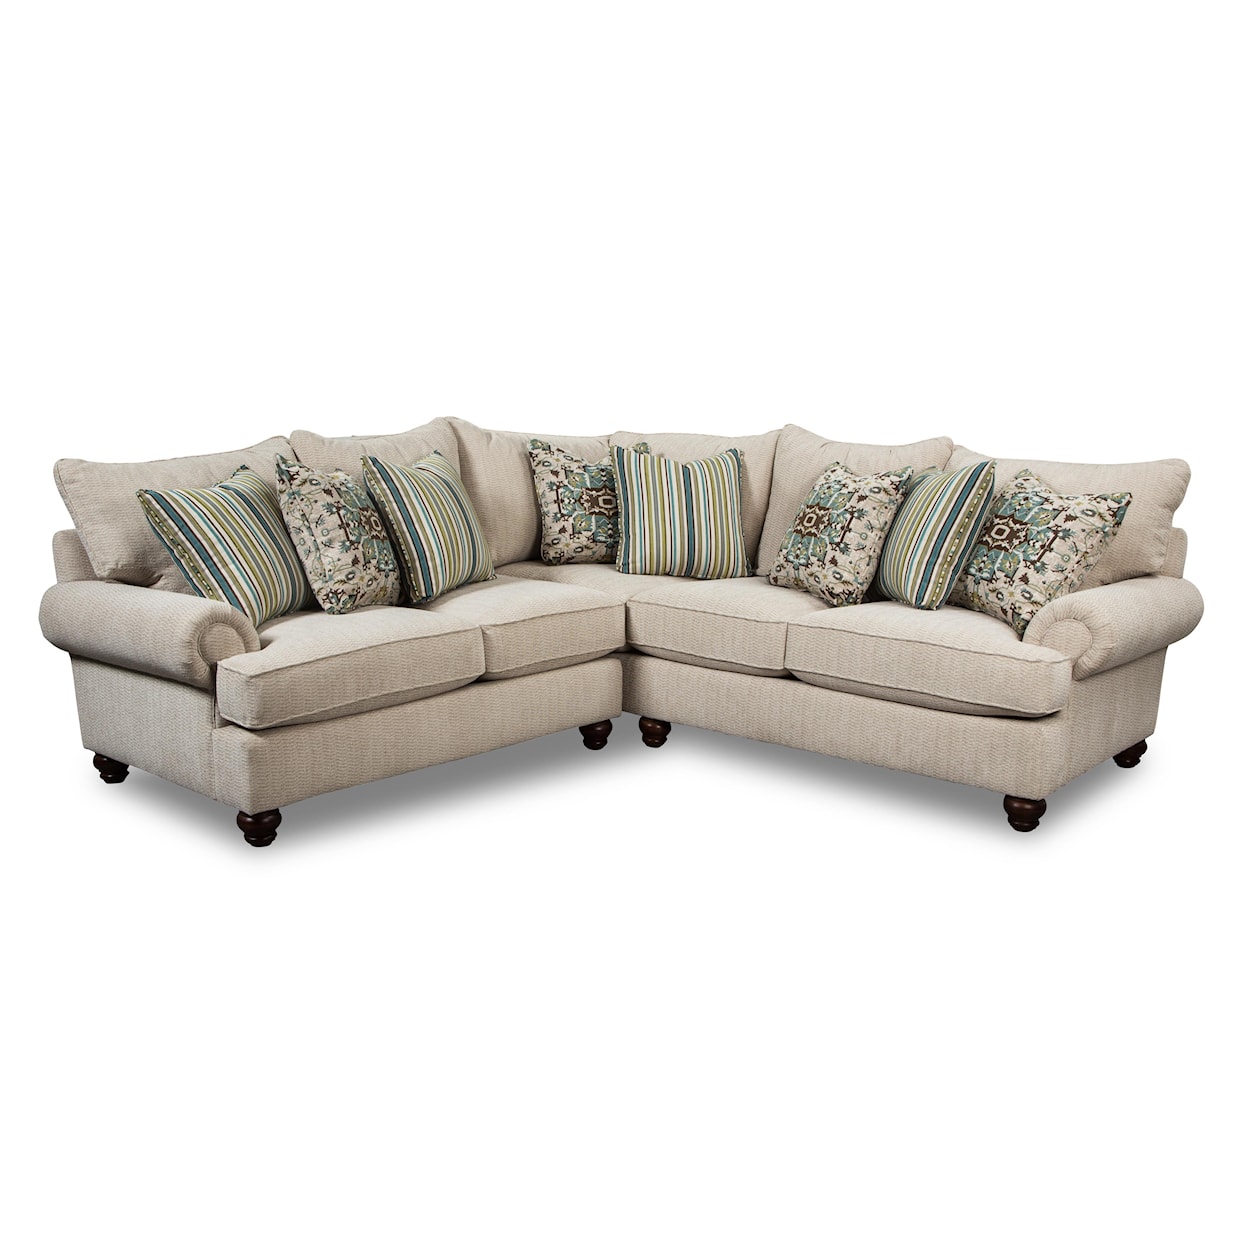 Craftmaster 7970 2 Pc Sectional Sofa